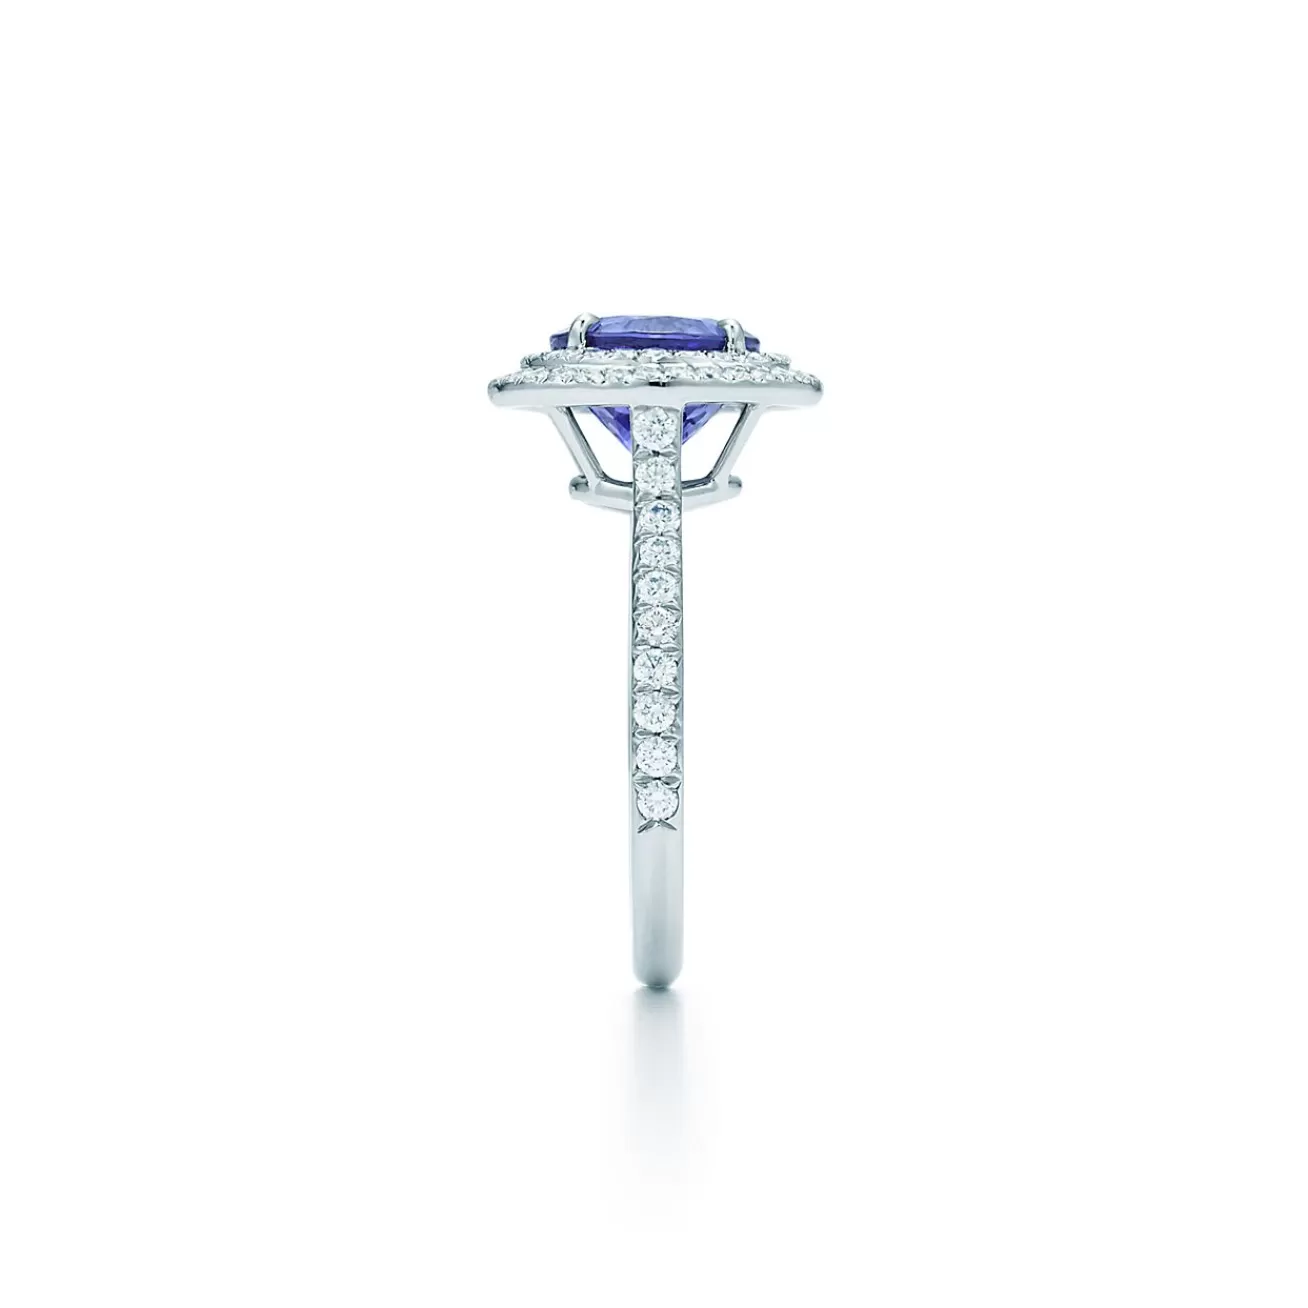 Tiffany & Co. Tiffany Soleste® ring in platinum with a .70-carat tanzanite and diamonds. | ^ Rings | Platinum Jewelry